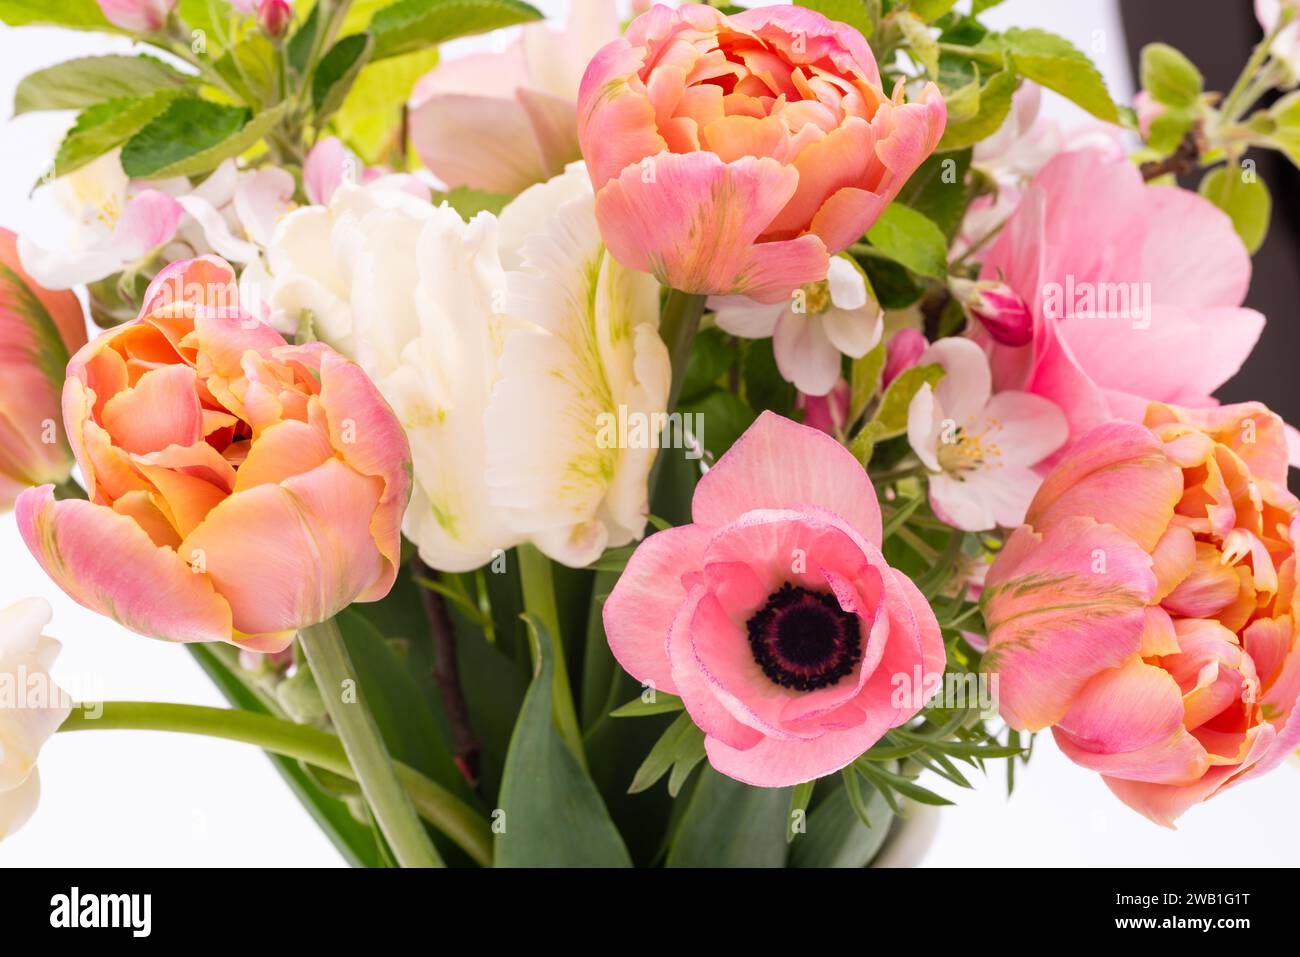 Elegant mixed pastel colored spring bouquet on white background. Spring tulips. Tulips bouquet. Stock Photo